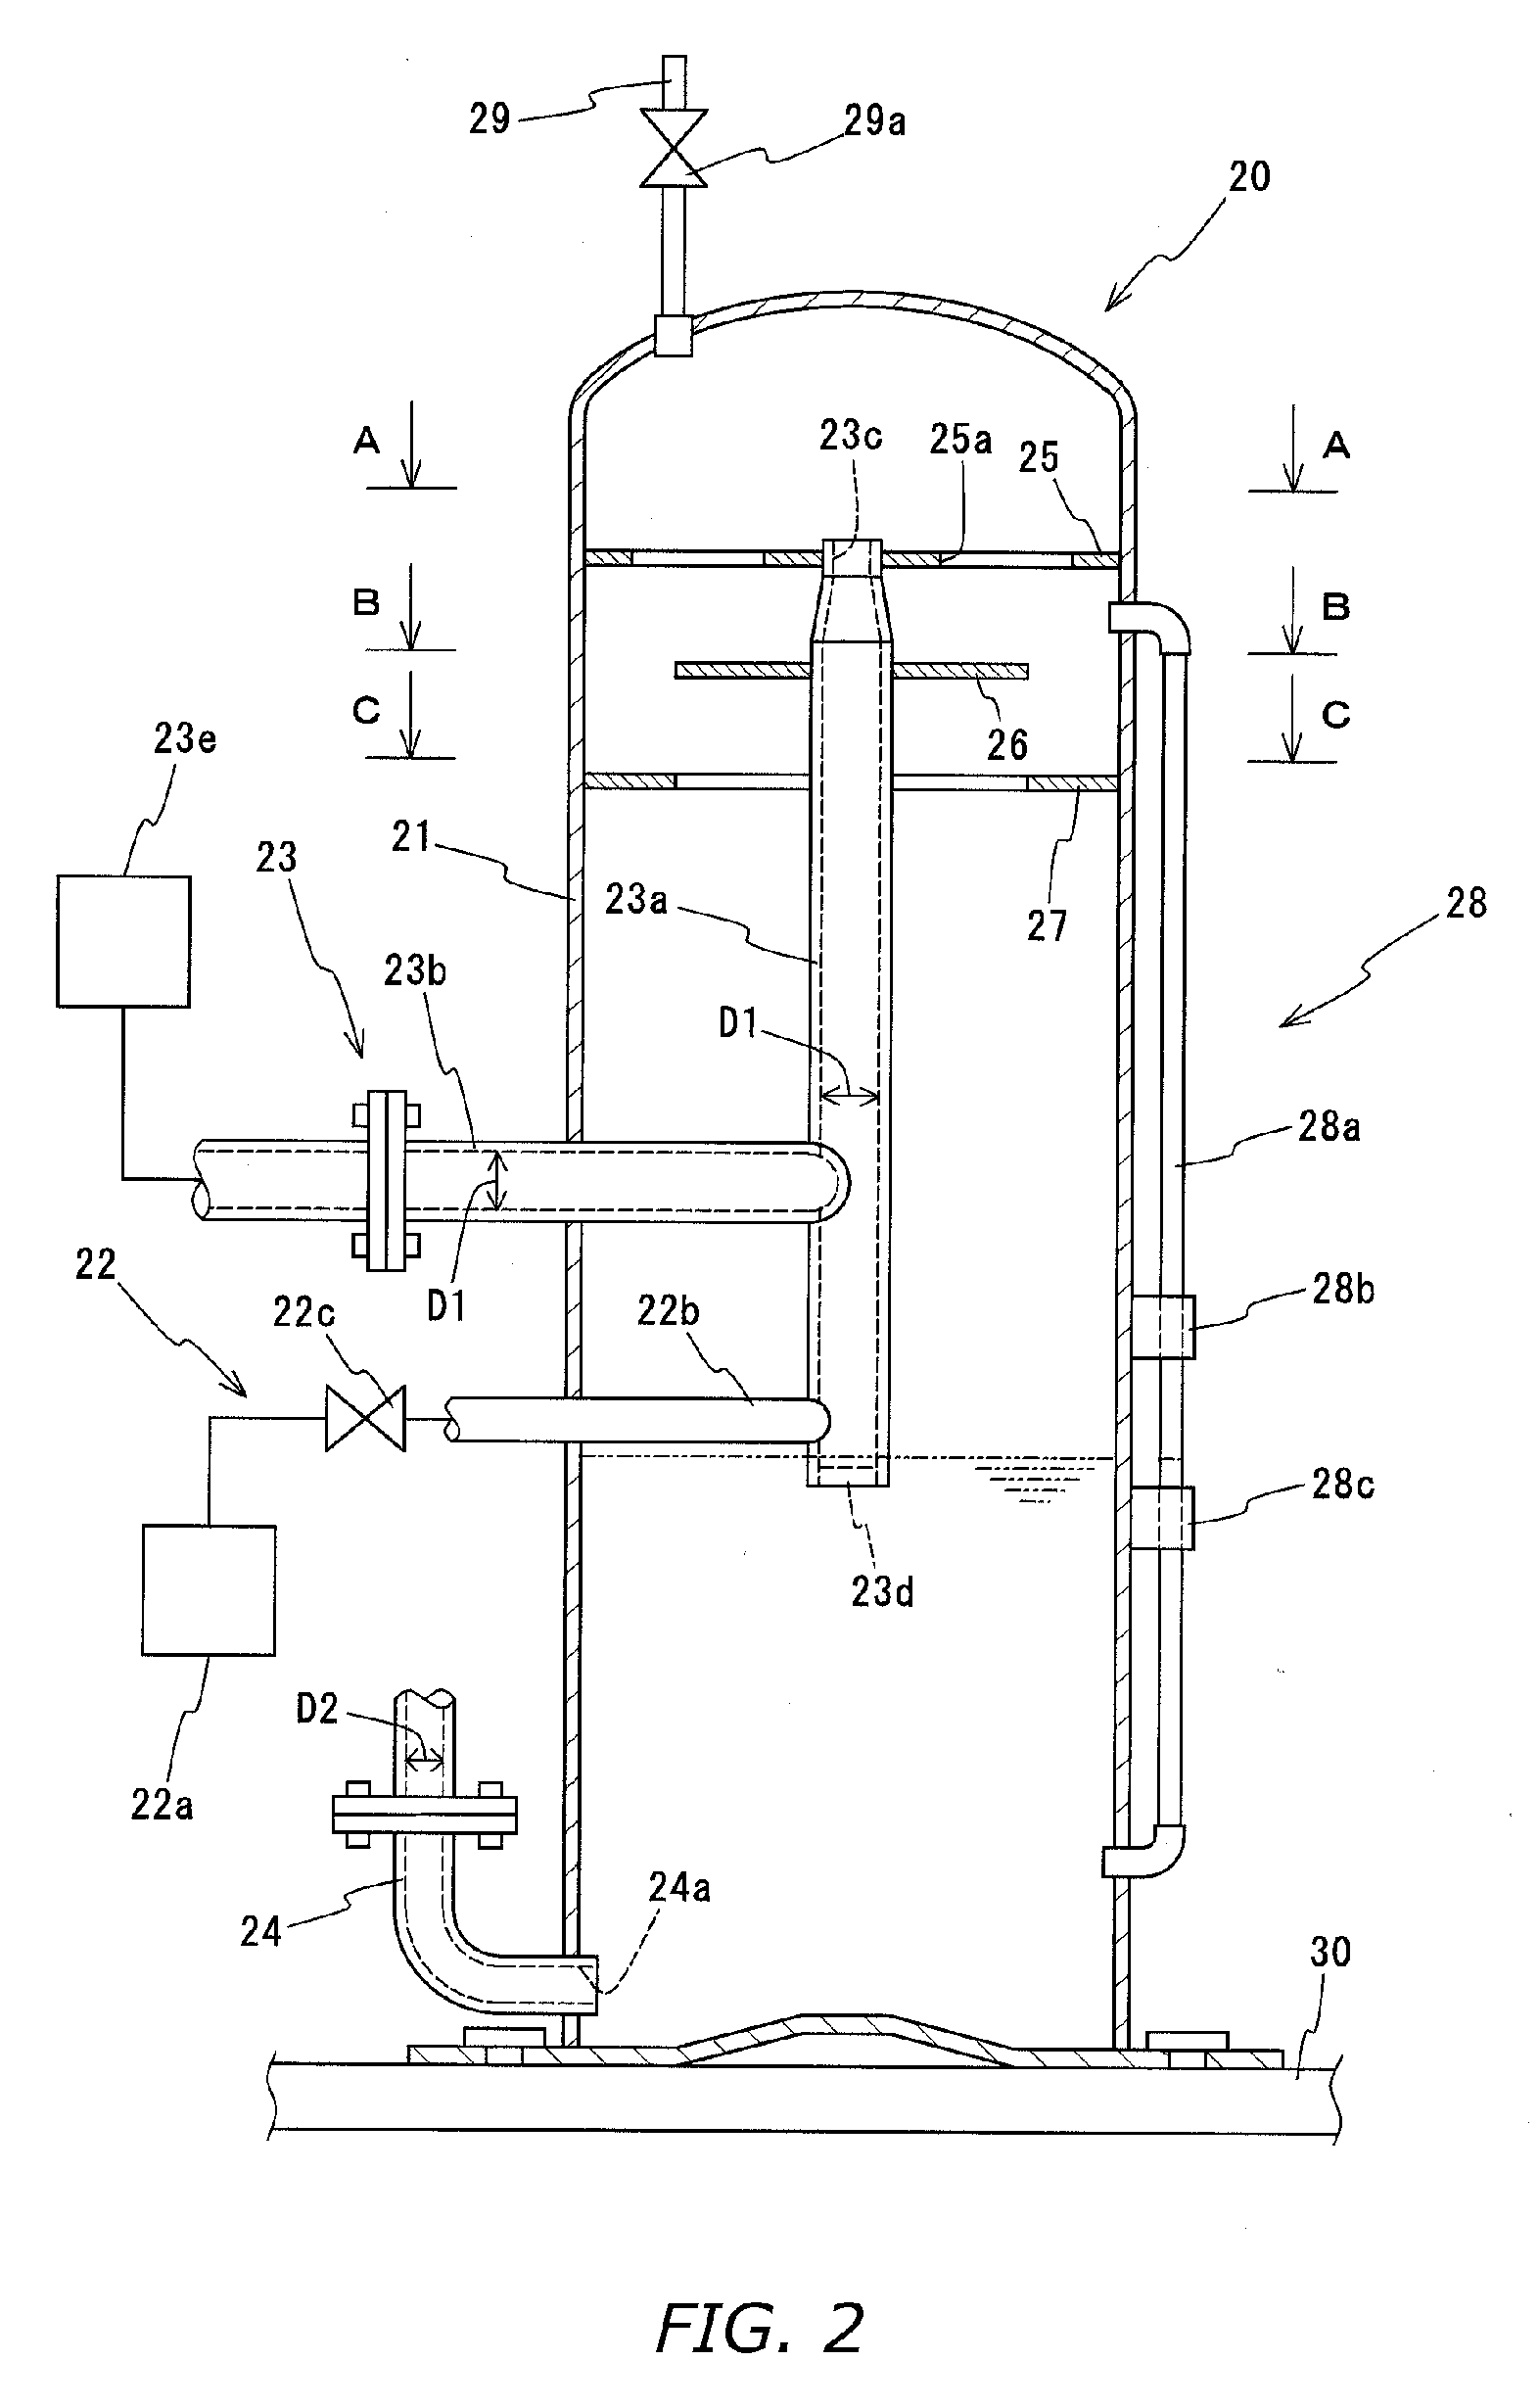 Functional Water and Method and System for Its Production